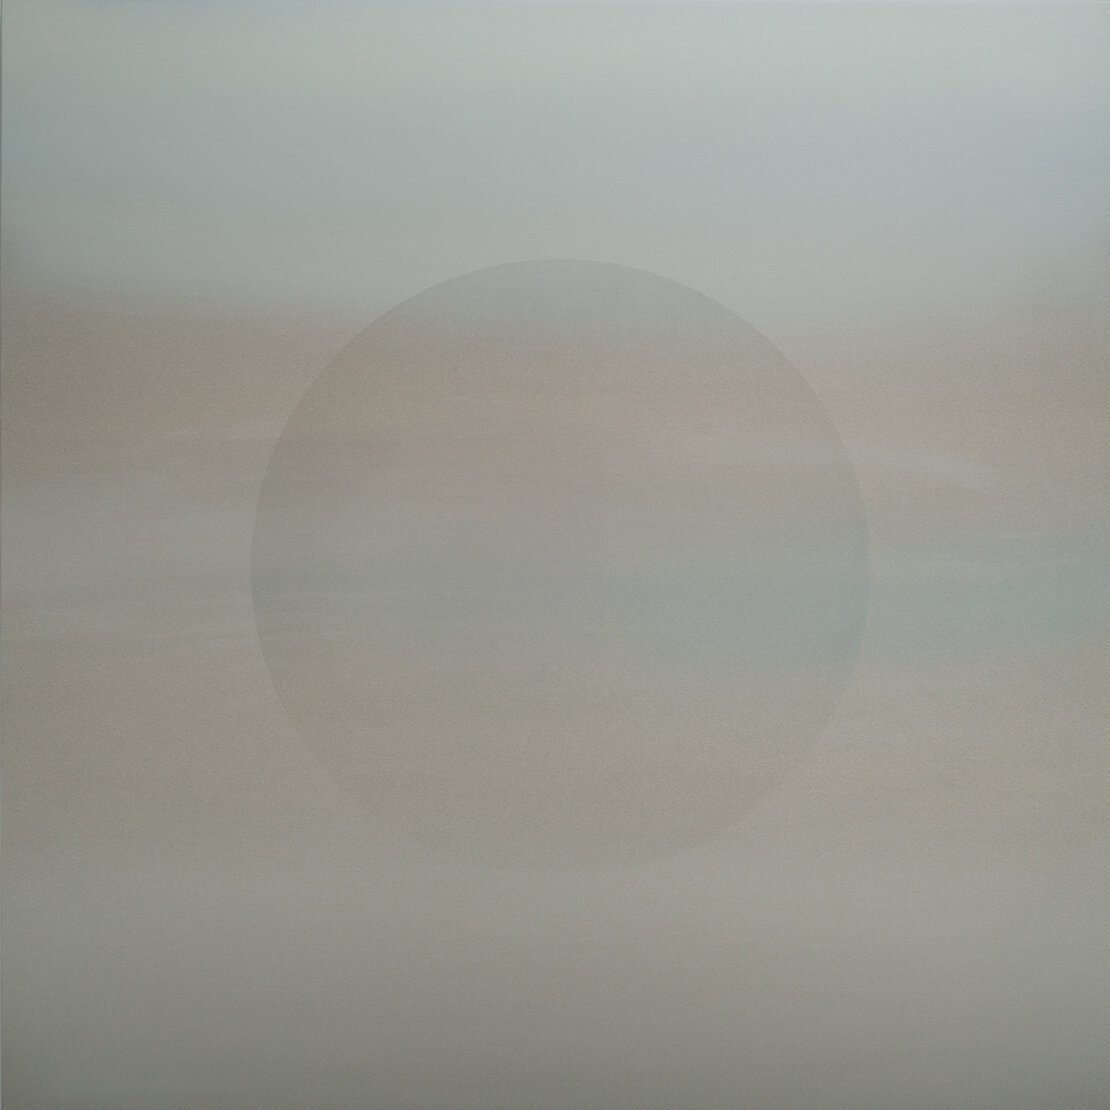 Oborozuki (A Moon Obscured by Clouds) Faint Blue, 2020